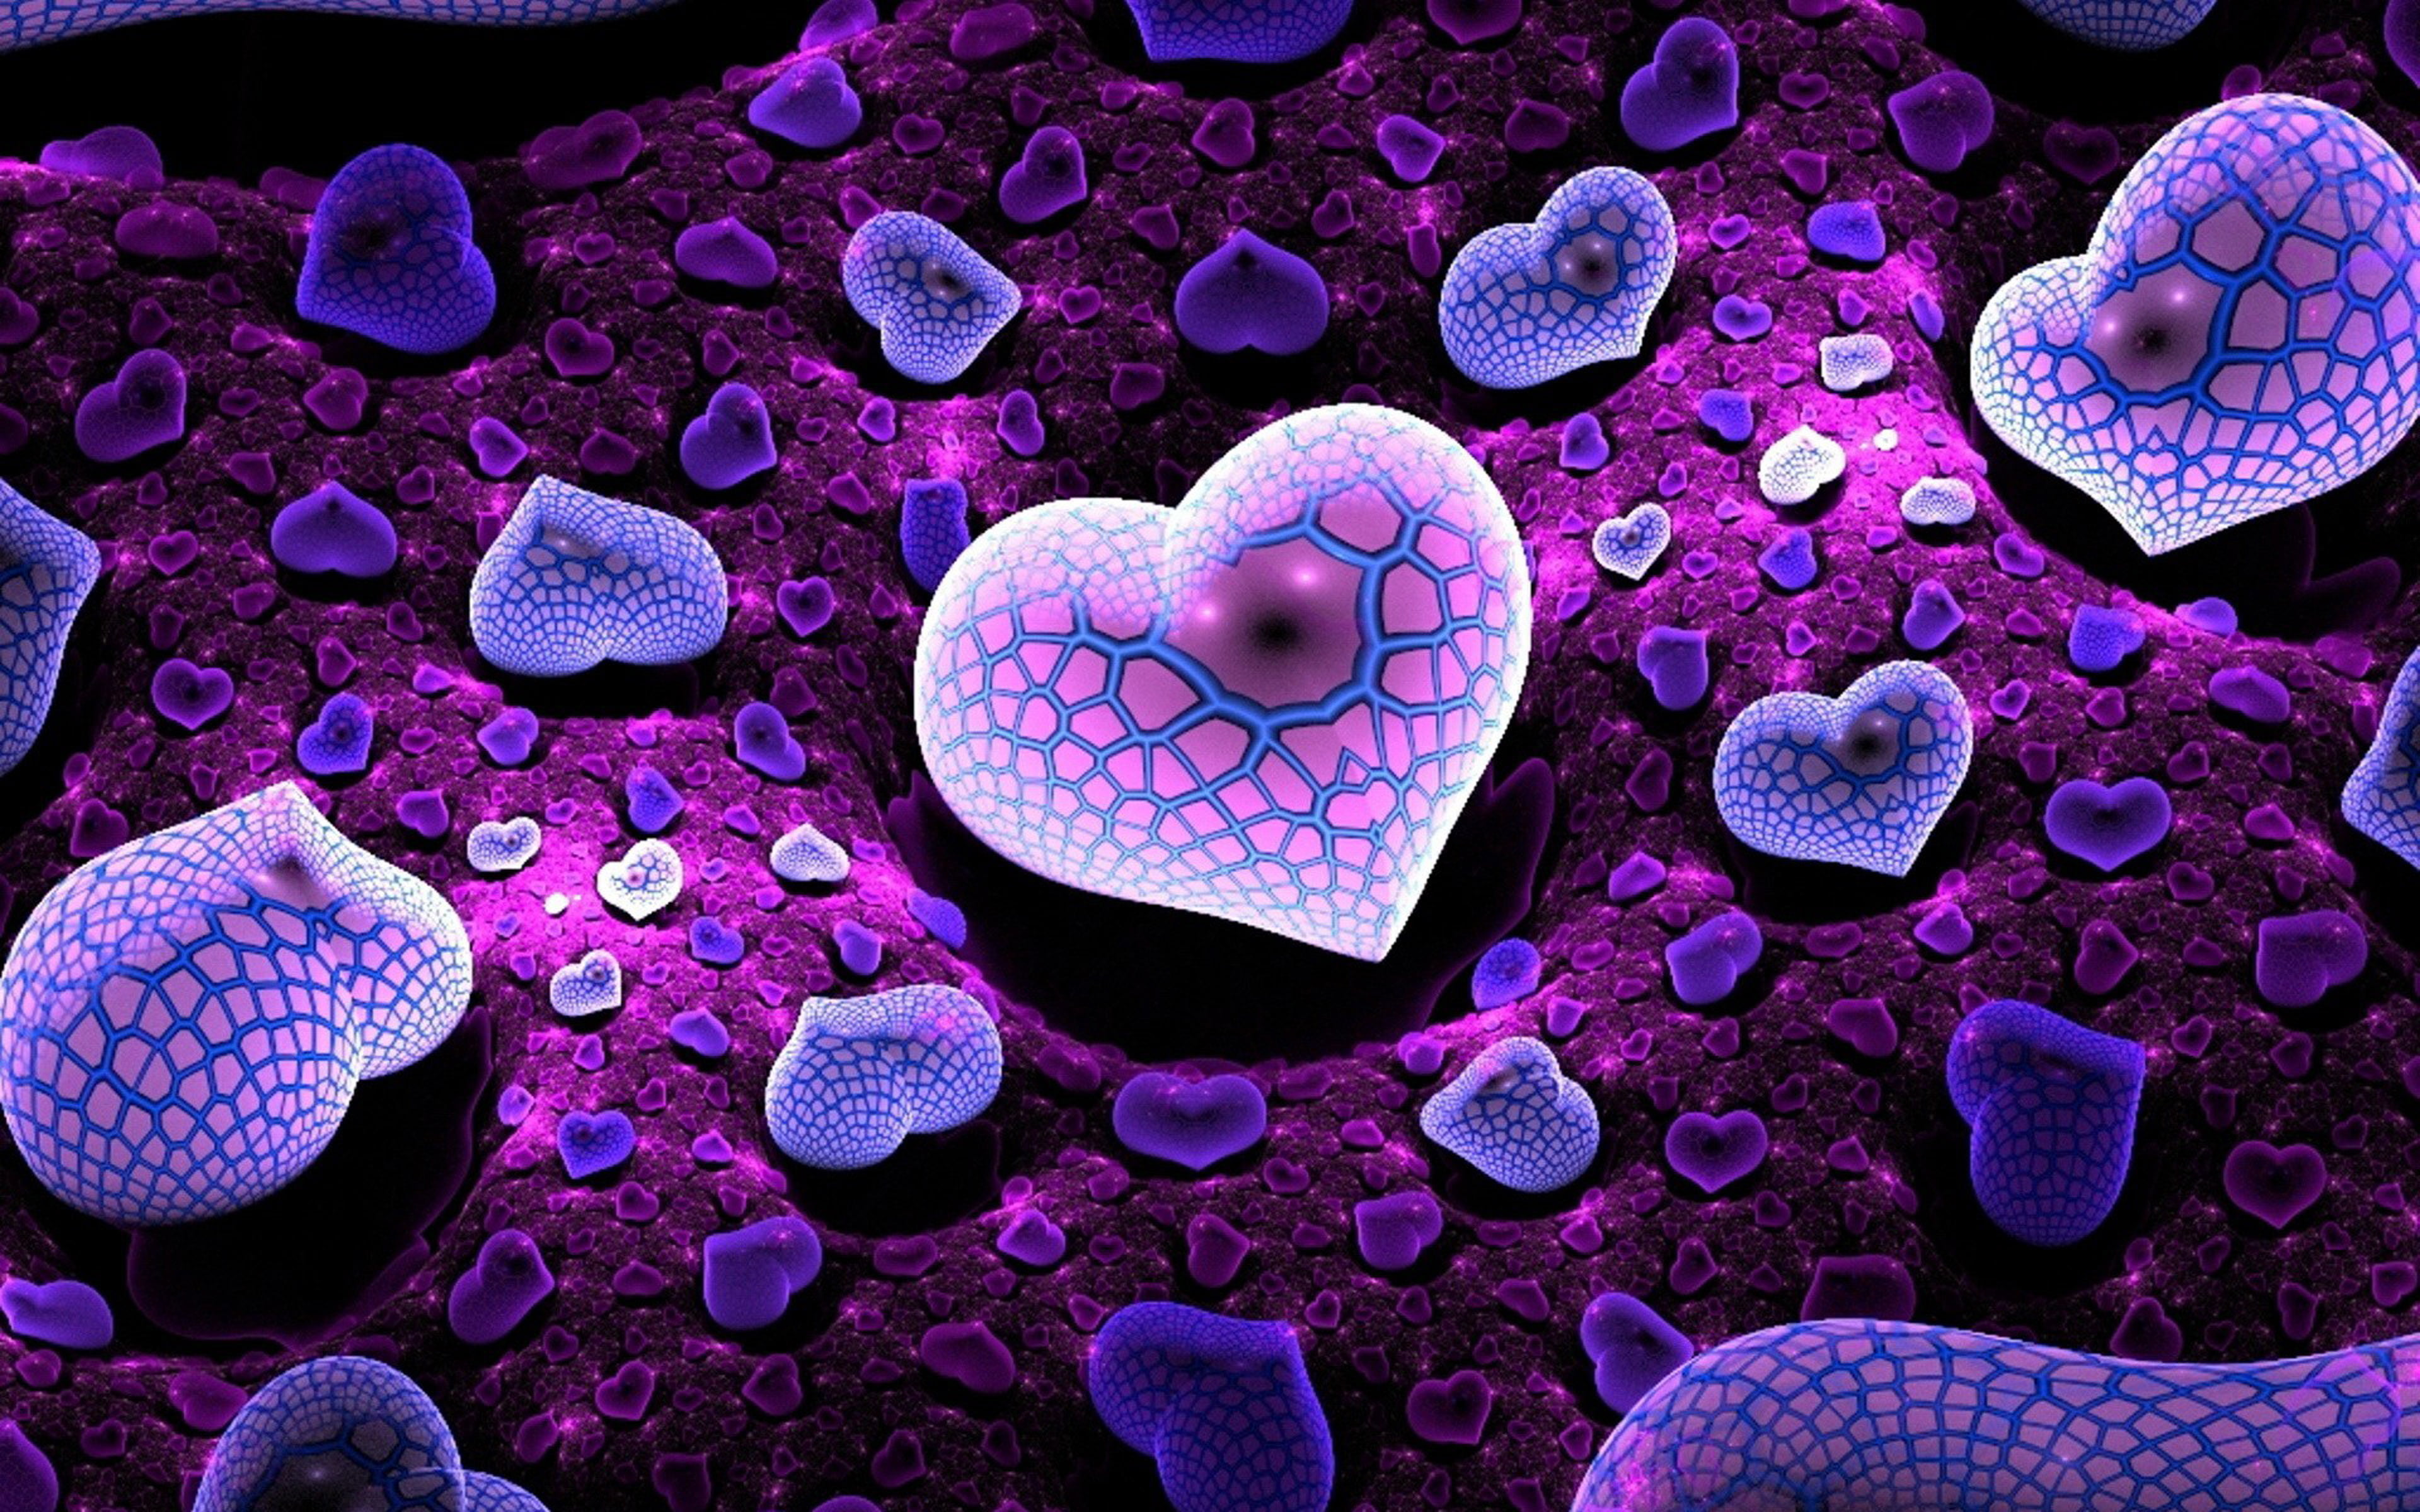 Purple Heart Love Abstract Graphic Wallpaper For Desktop Pc Tablet Mobile Phones 3840×2400